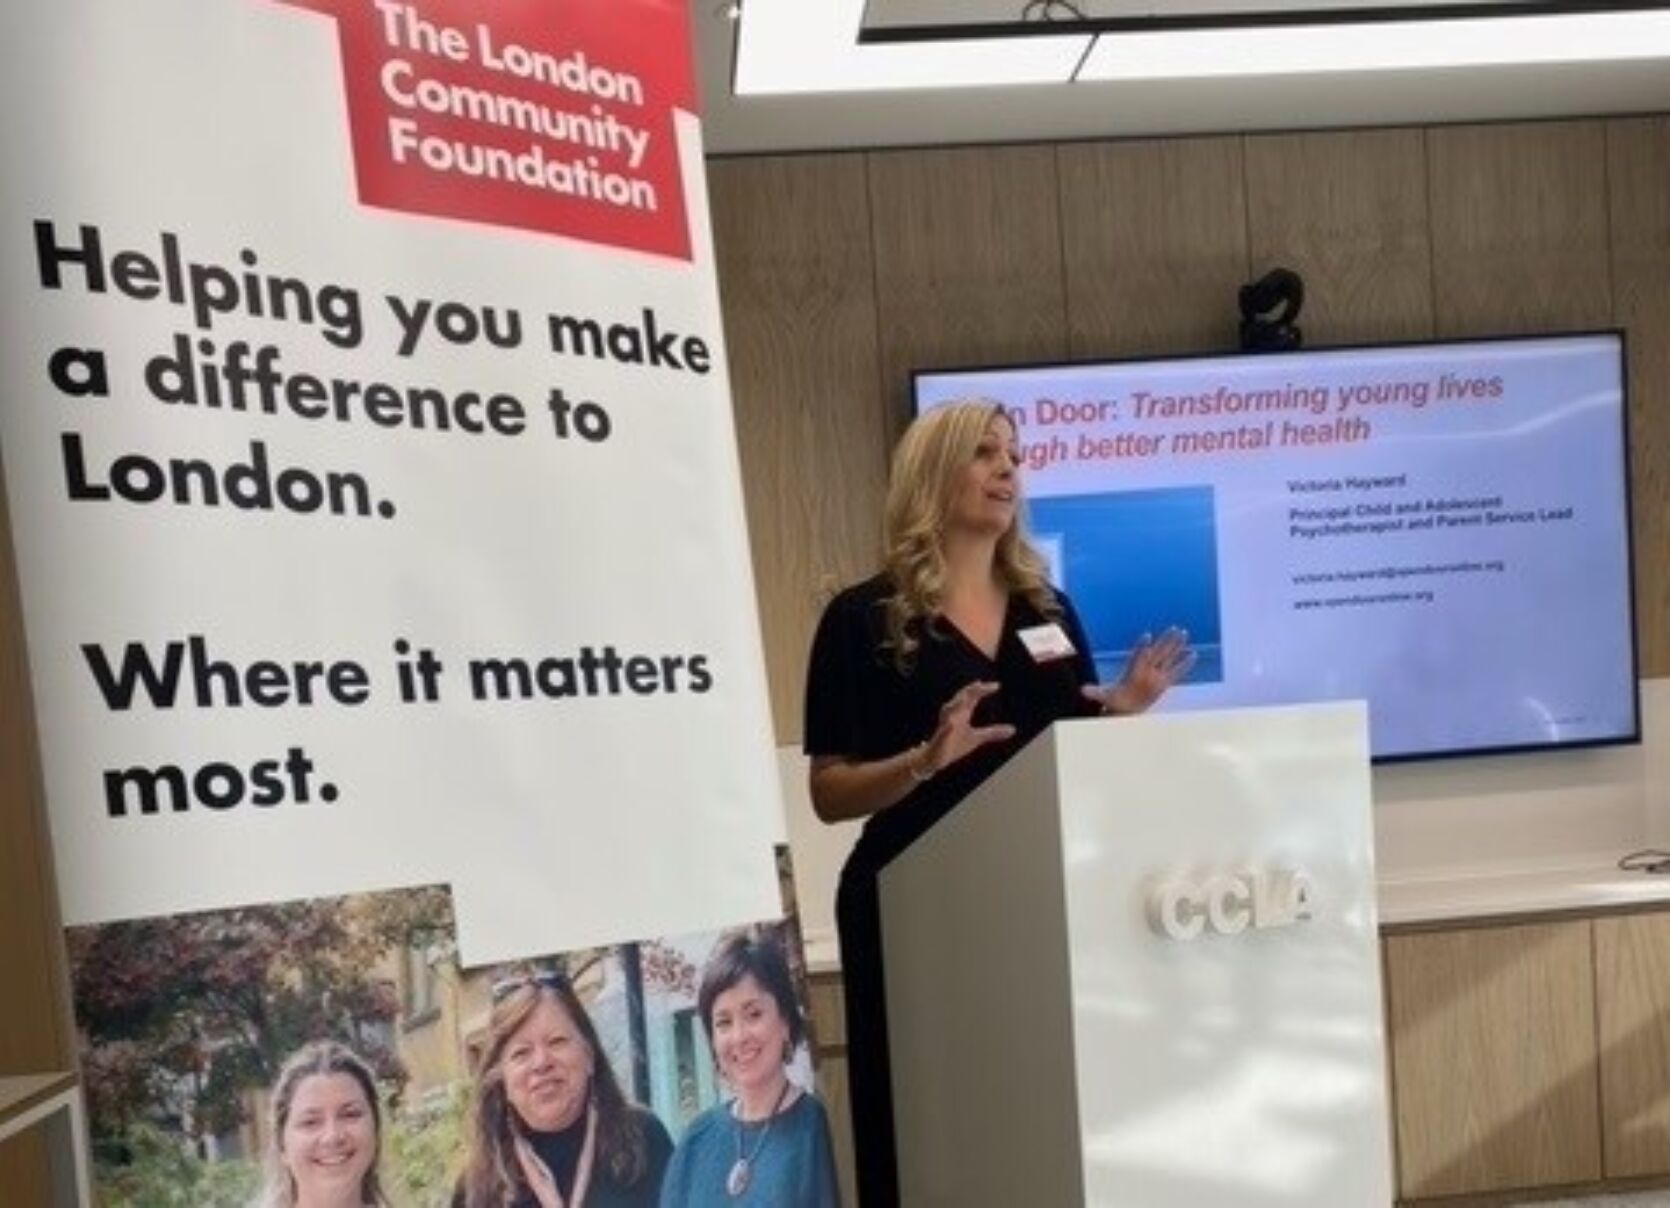 A person presenting at the Youth Futures Fund event. In the foreground is a London Community Foundation pull-up banner containing the words 'The London Community Foundation. Helping you make a difference to London. Where it matters most.' In the background is a large screen featuring some presentation slides.